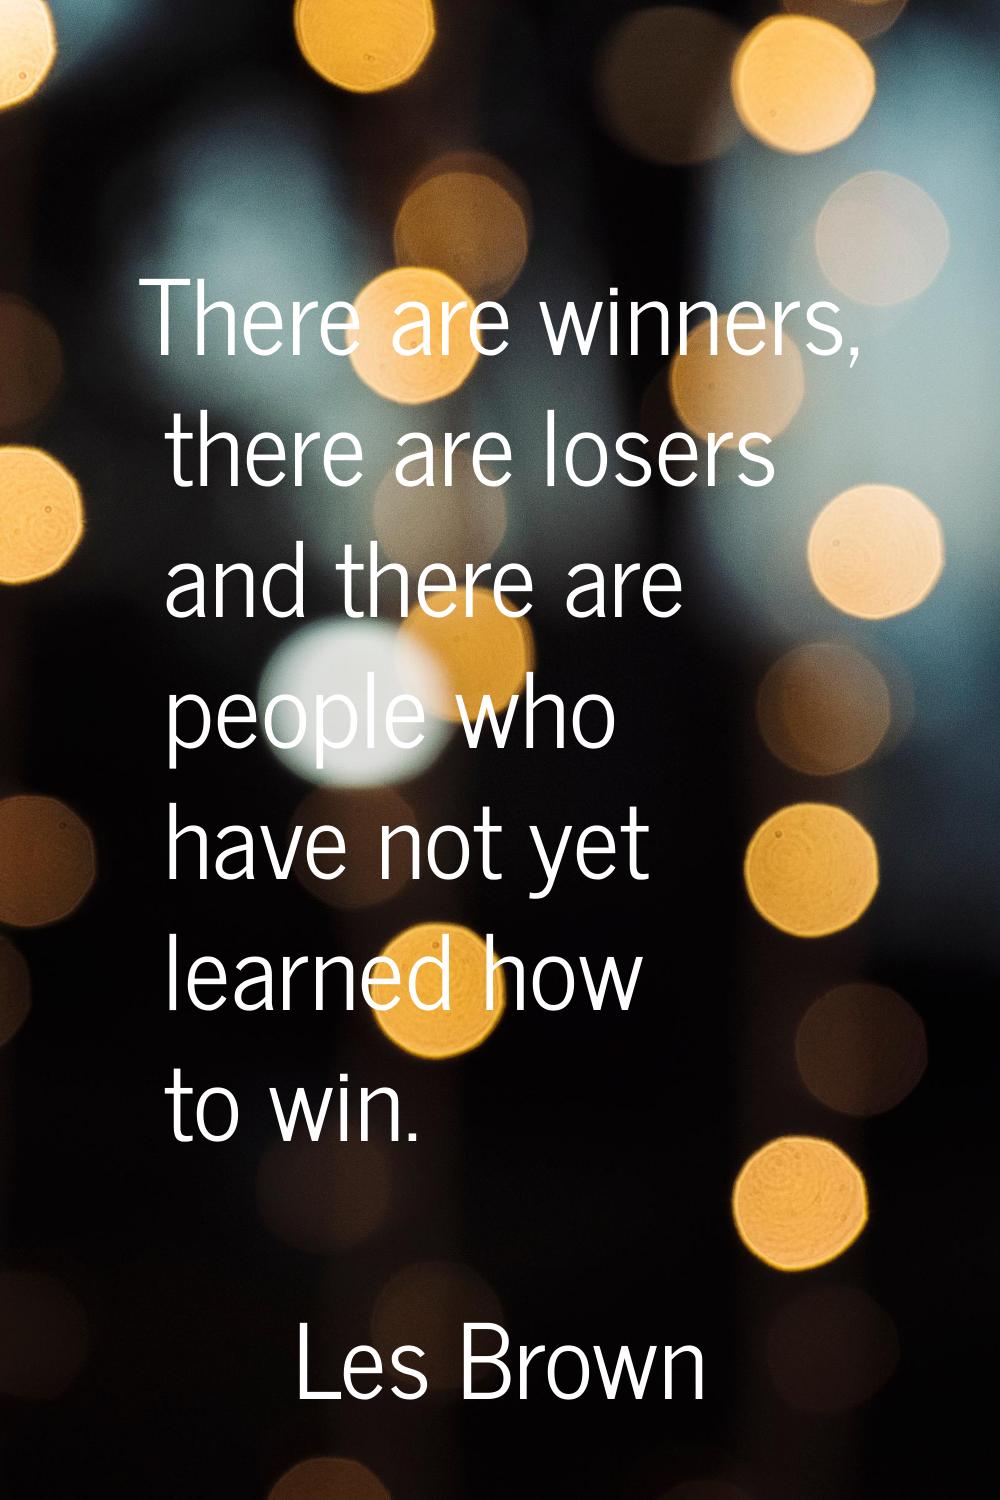 There are winners, there are losers and there are people who have not yet learned how to win.